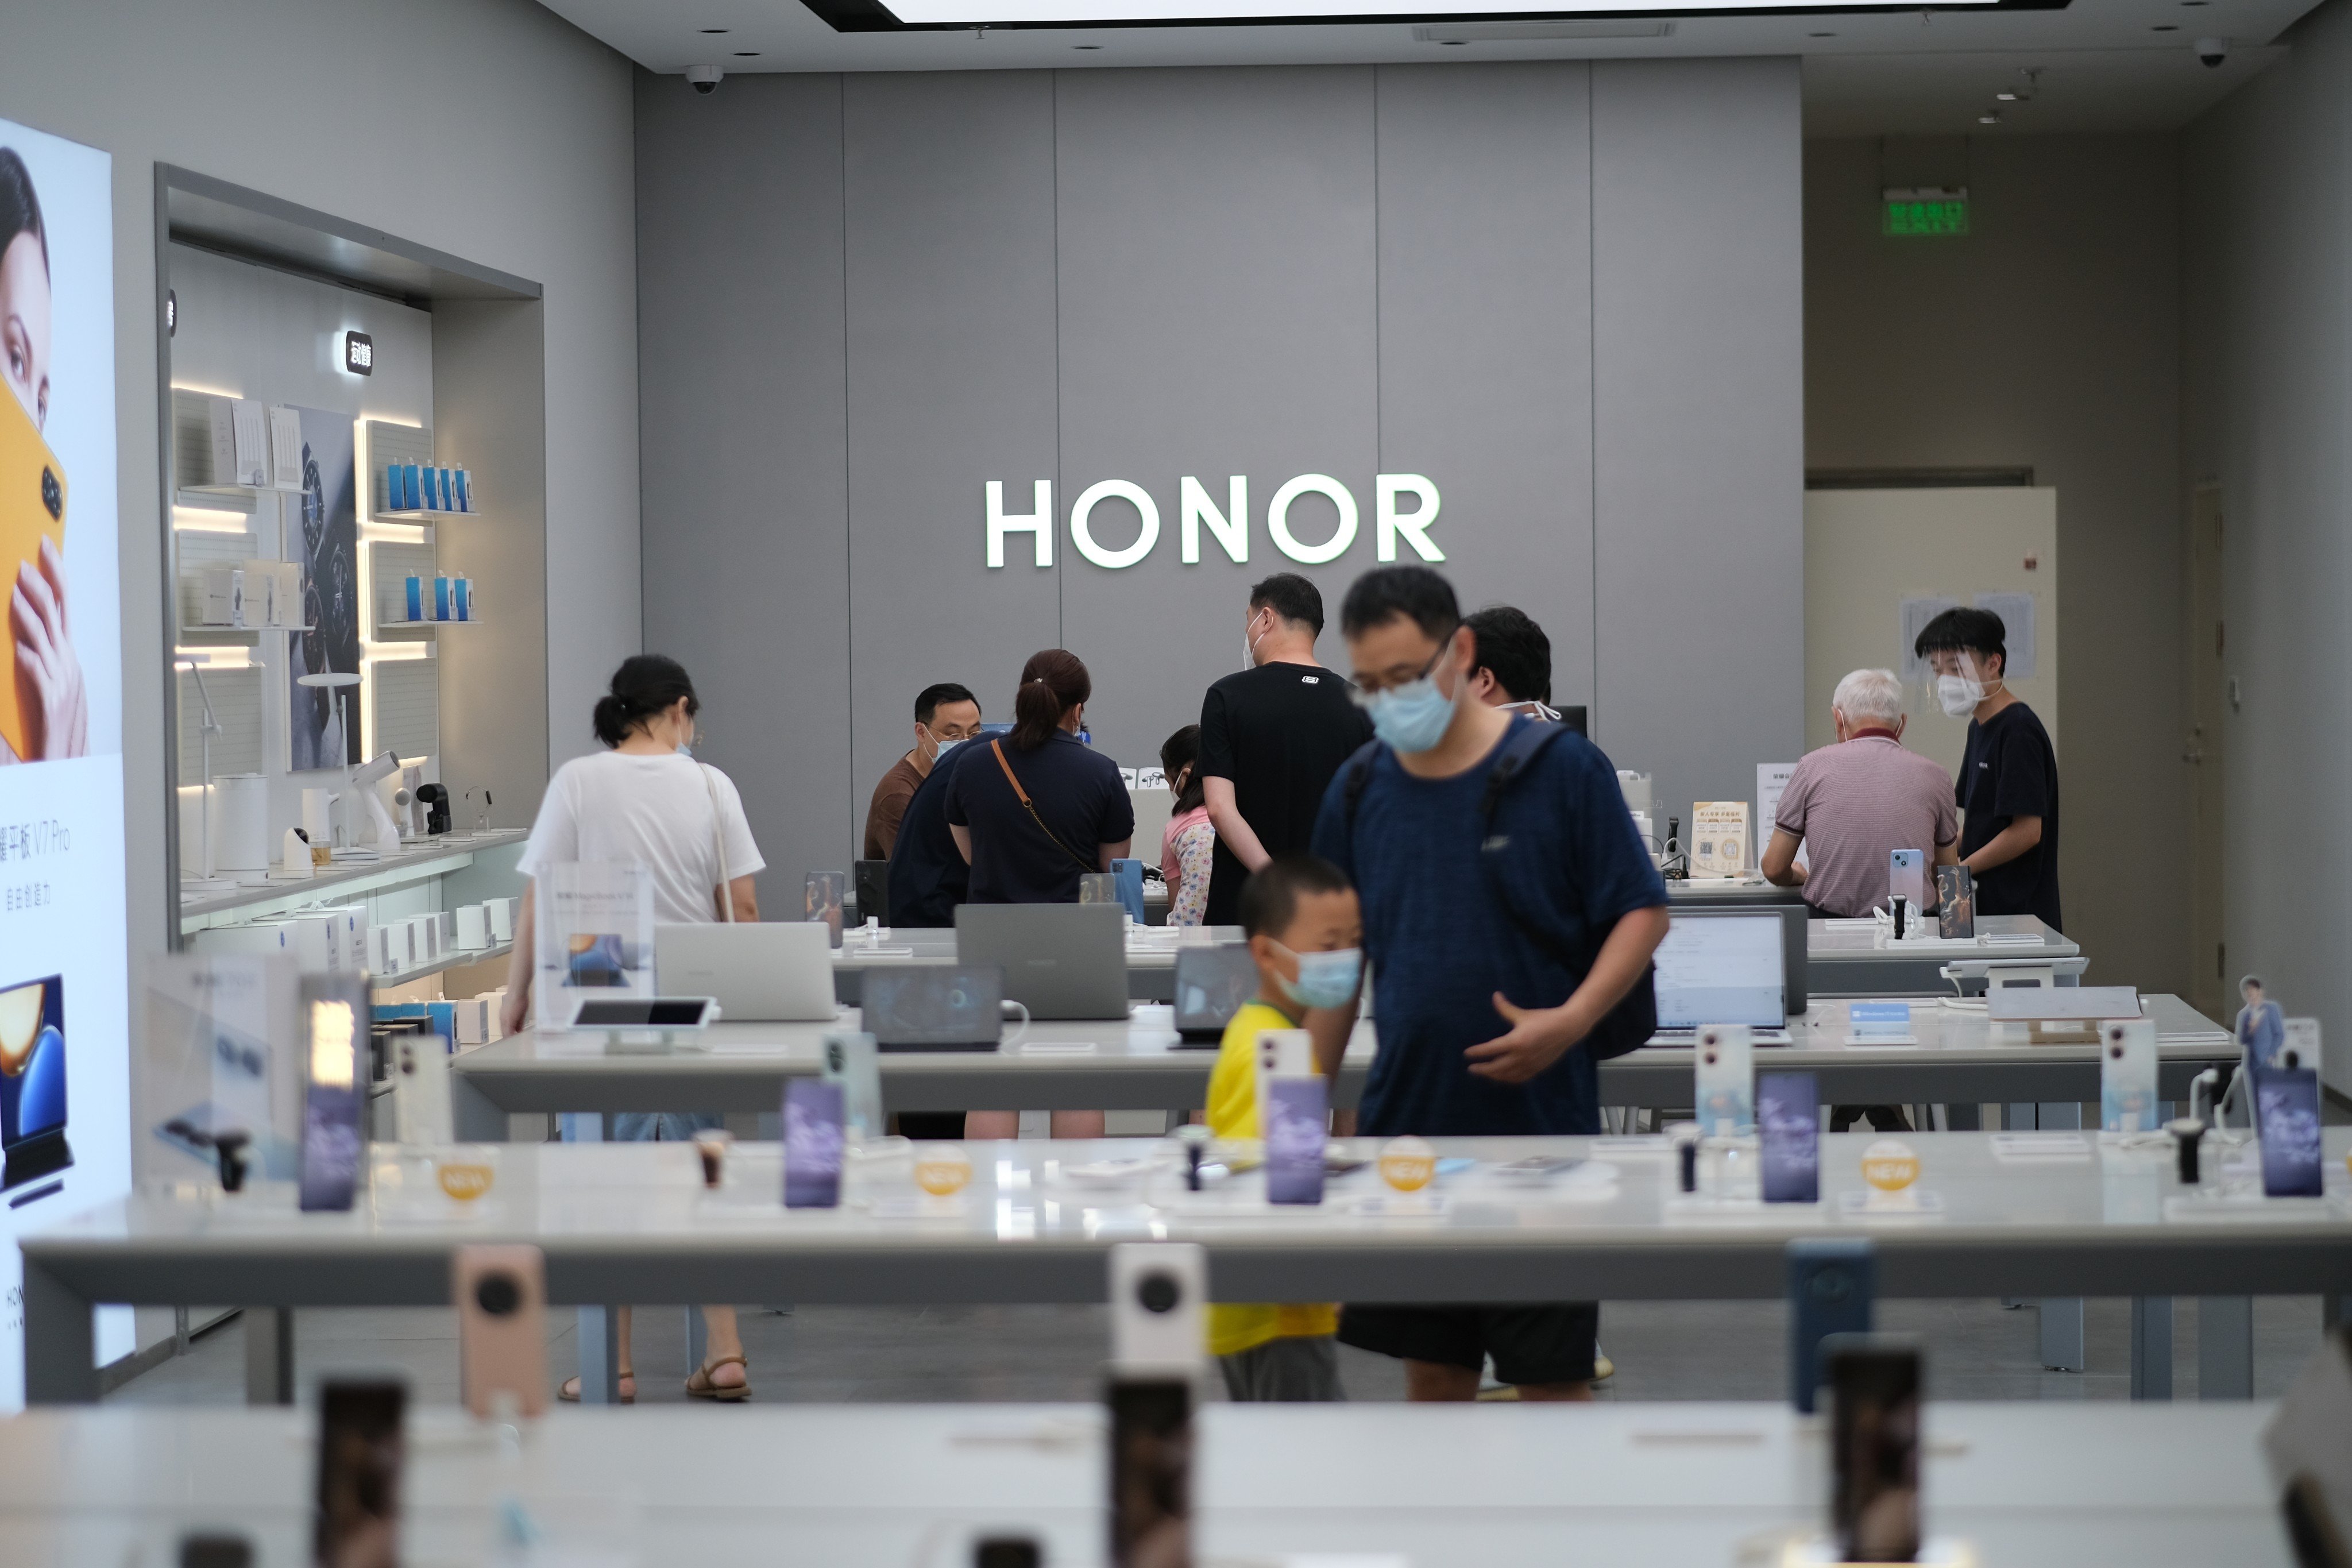 Shoppers seen inside an Honor smartphone retail store in China. Photo: Shutterstock